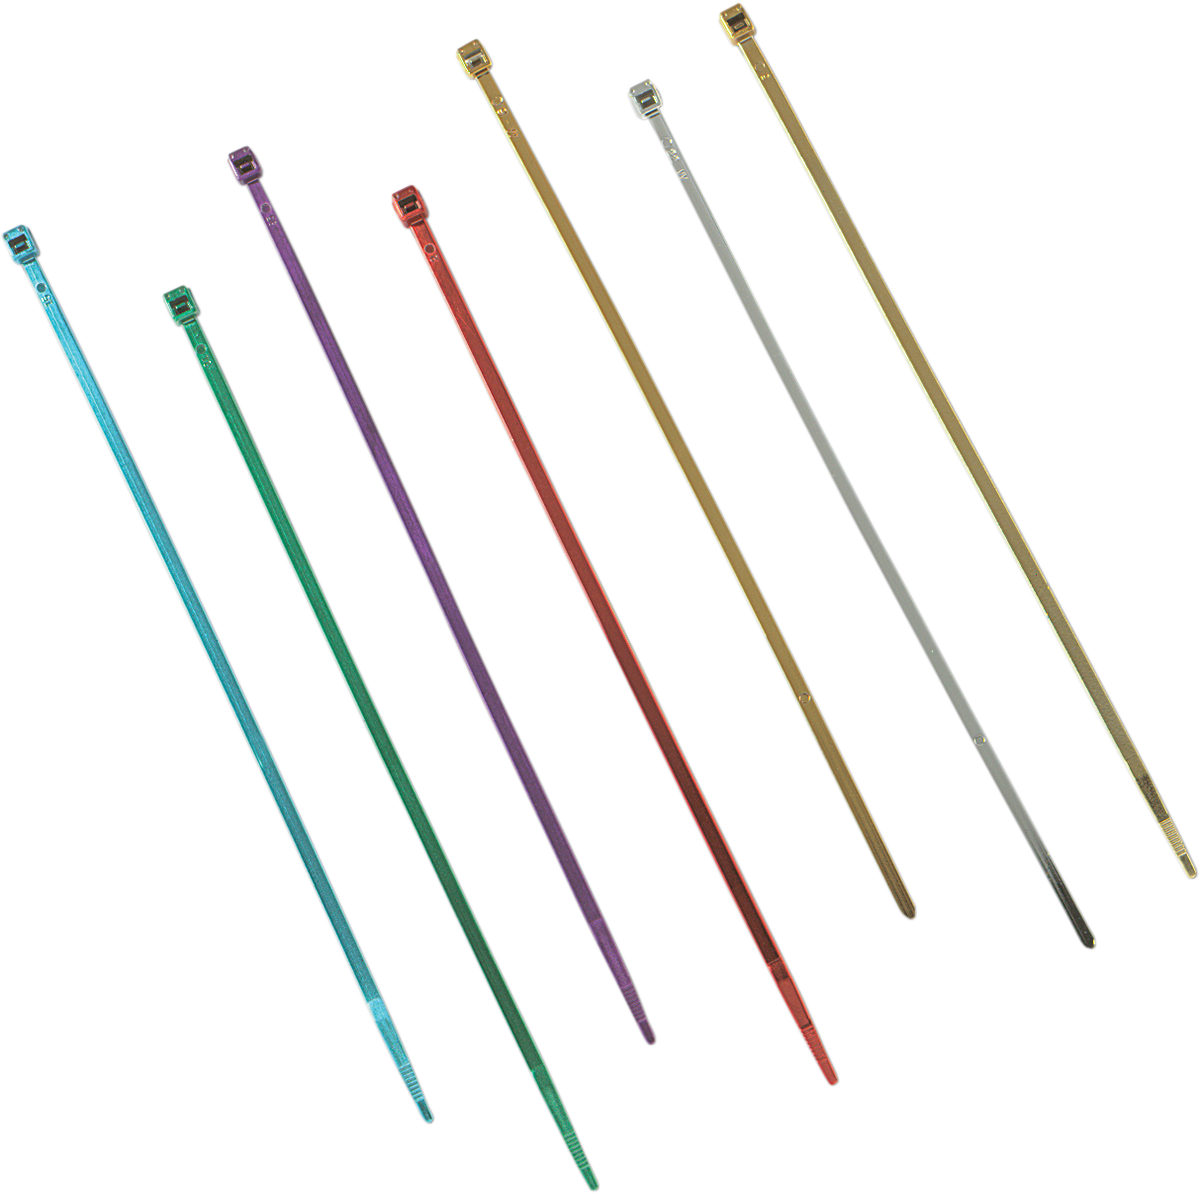 DRAG SPECIALTIES CHROME CABLE TIES CHROME CABLE TIE 4" 10 PK